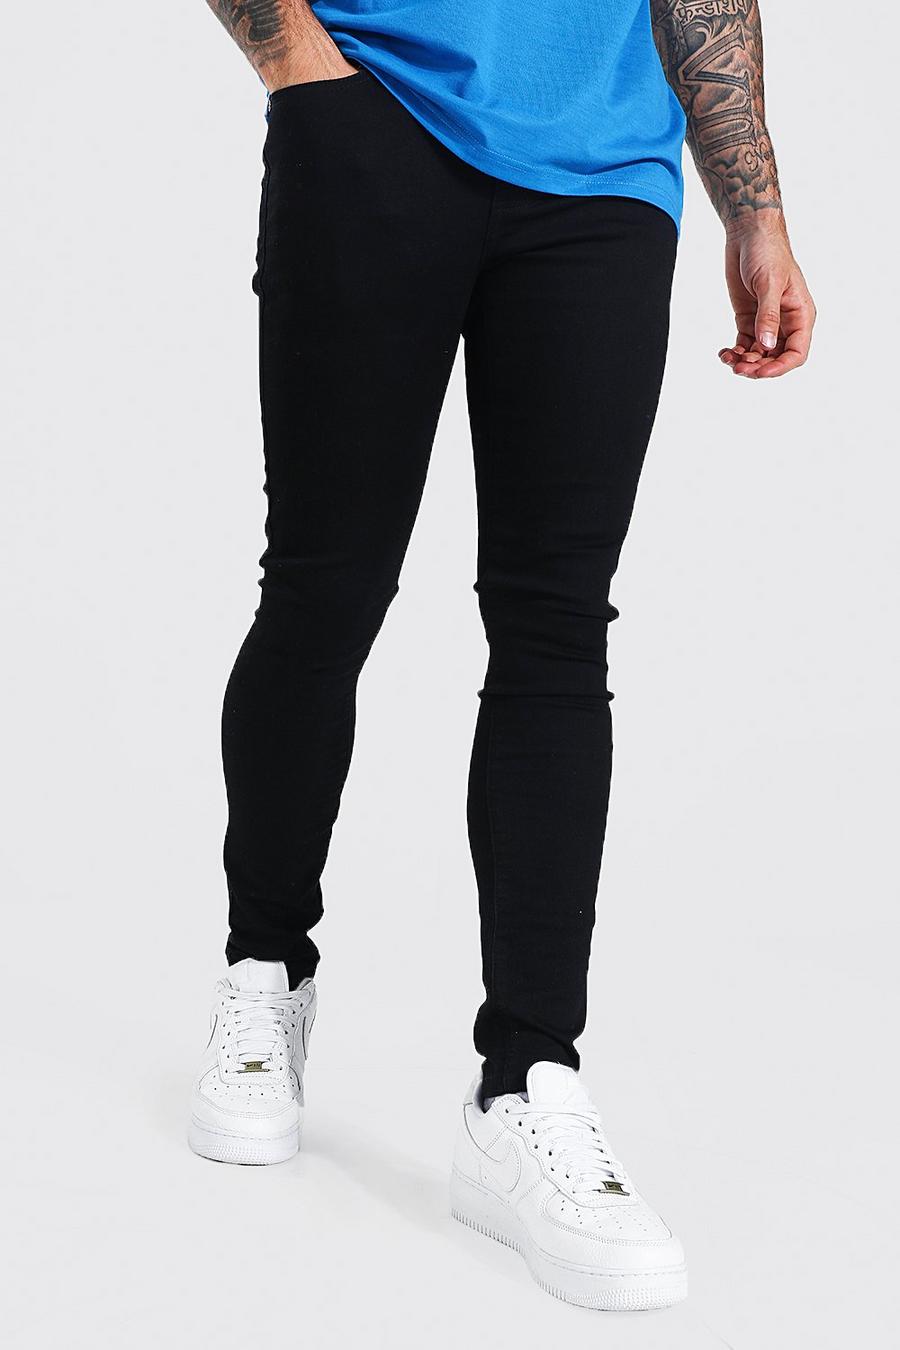 Jeans Super Skinny Fit in cotone organico, Black negro image number 1